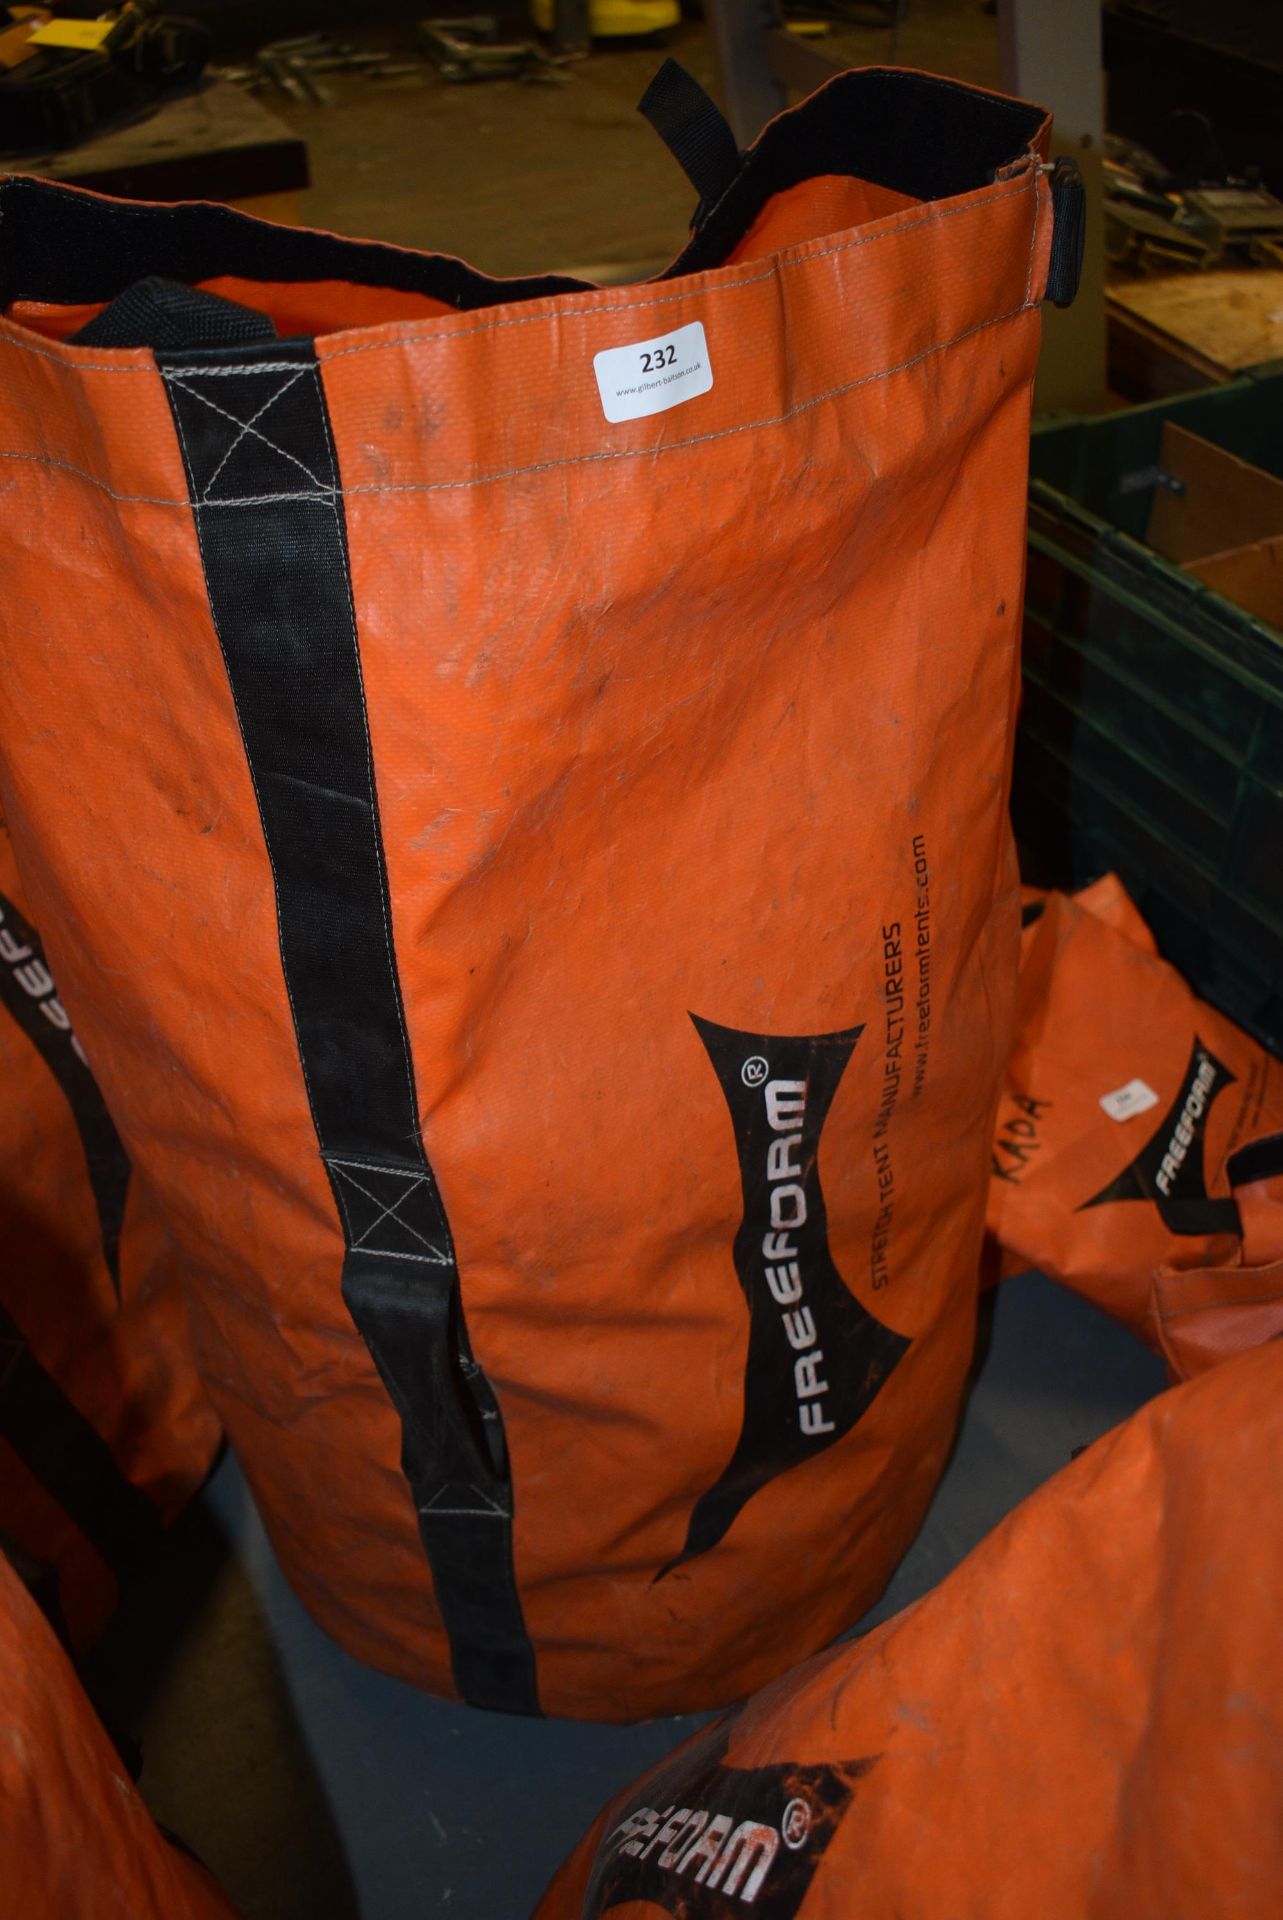 *Freeform Stretch Tent Storage Bag Containing Black Guide Ropes - Image 2 of 2